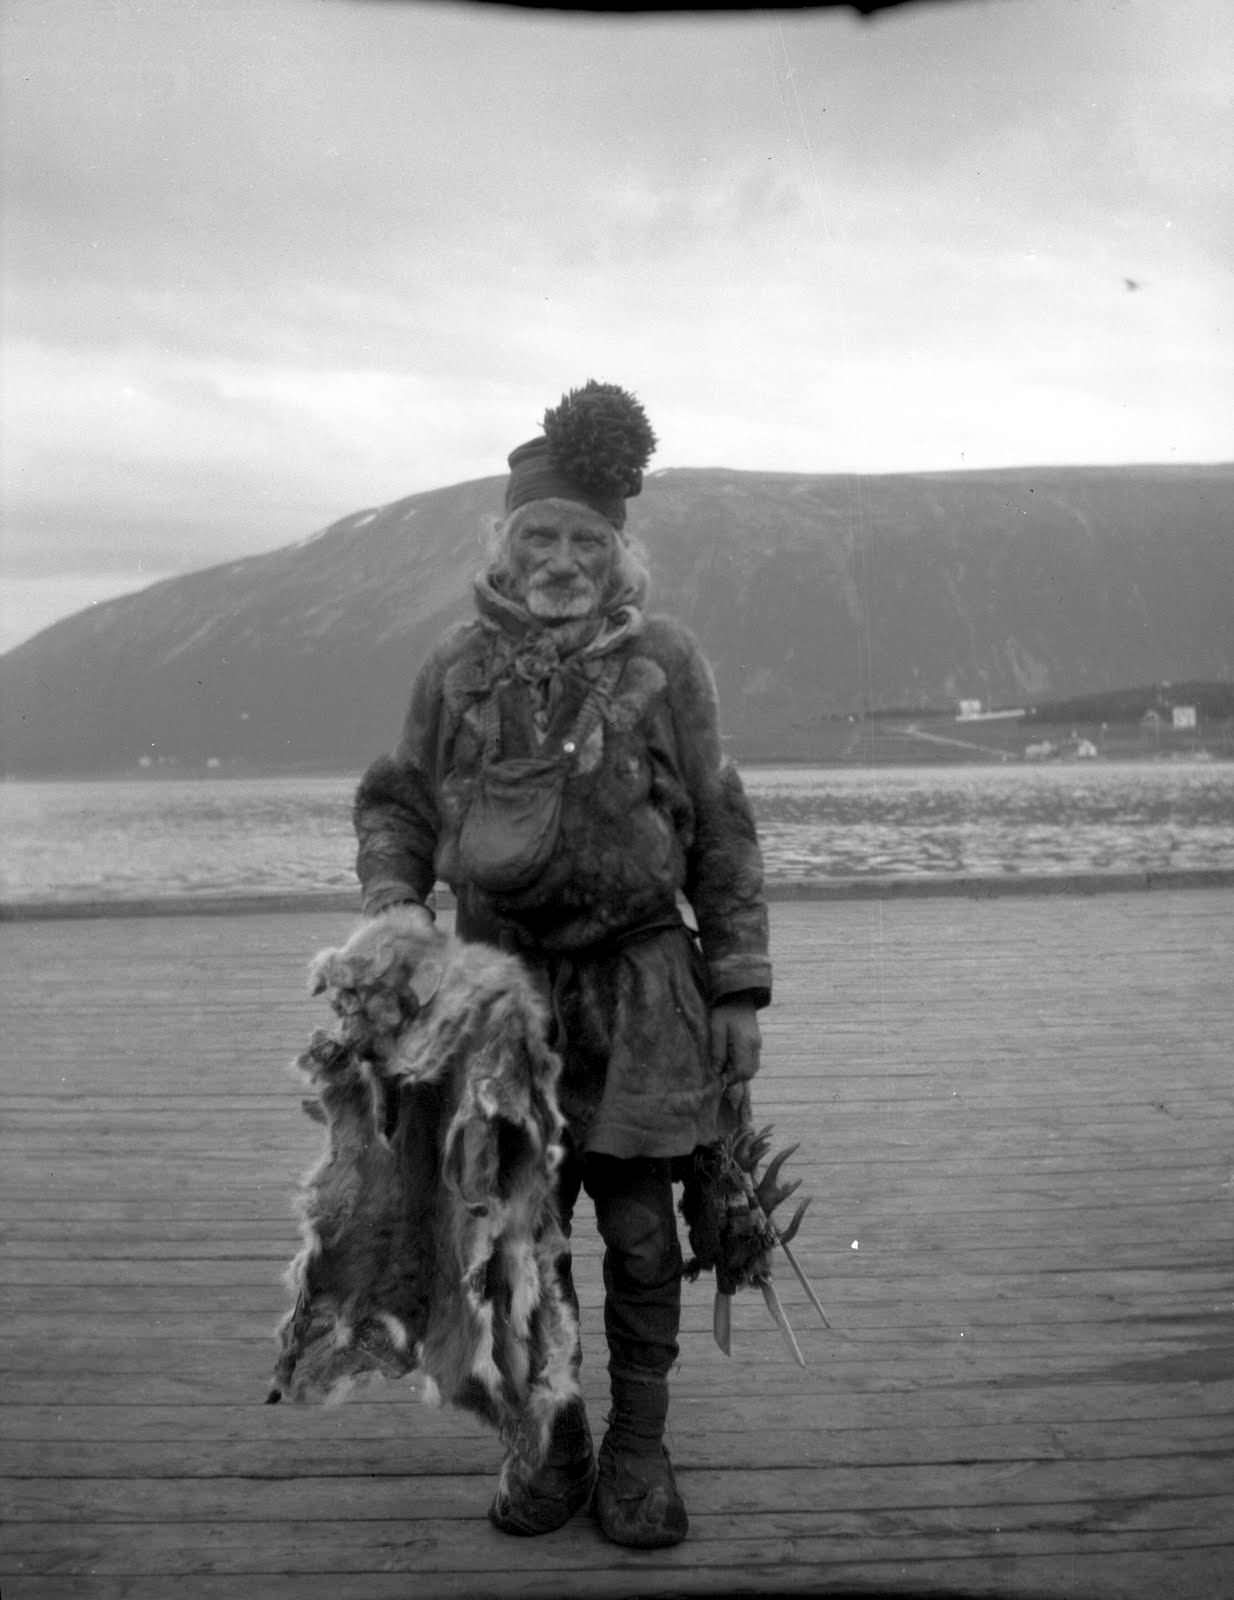 A fur trader known as a Coastal Sami somewhere in Norway, 1931.